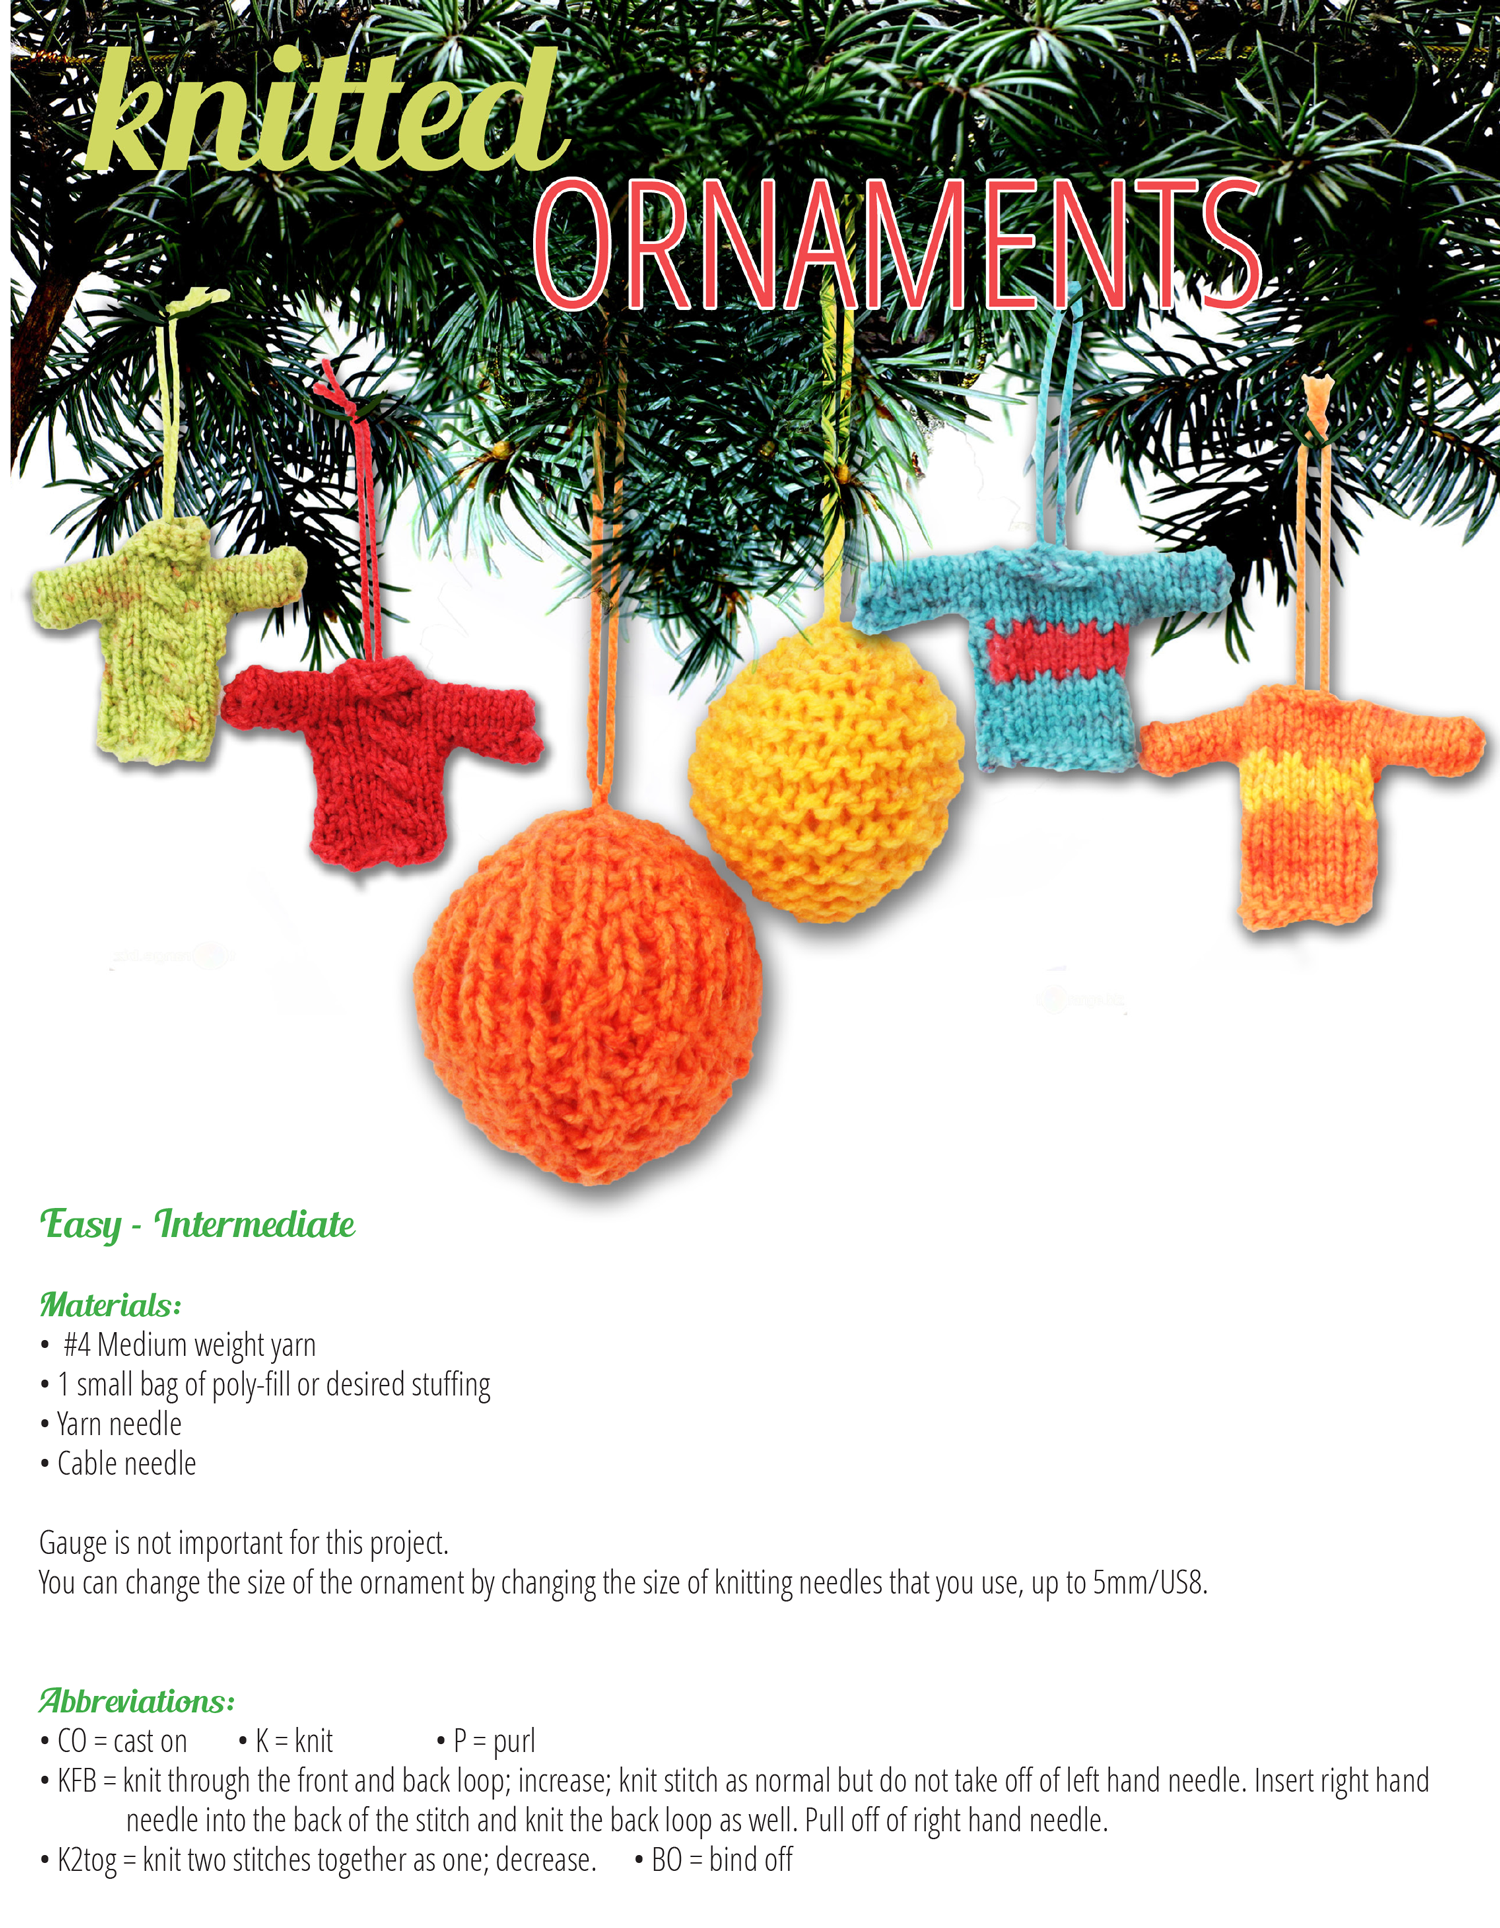 Materials to create knitted ornaments and abbreviations used in the tutorial